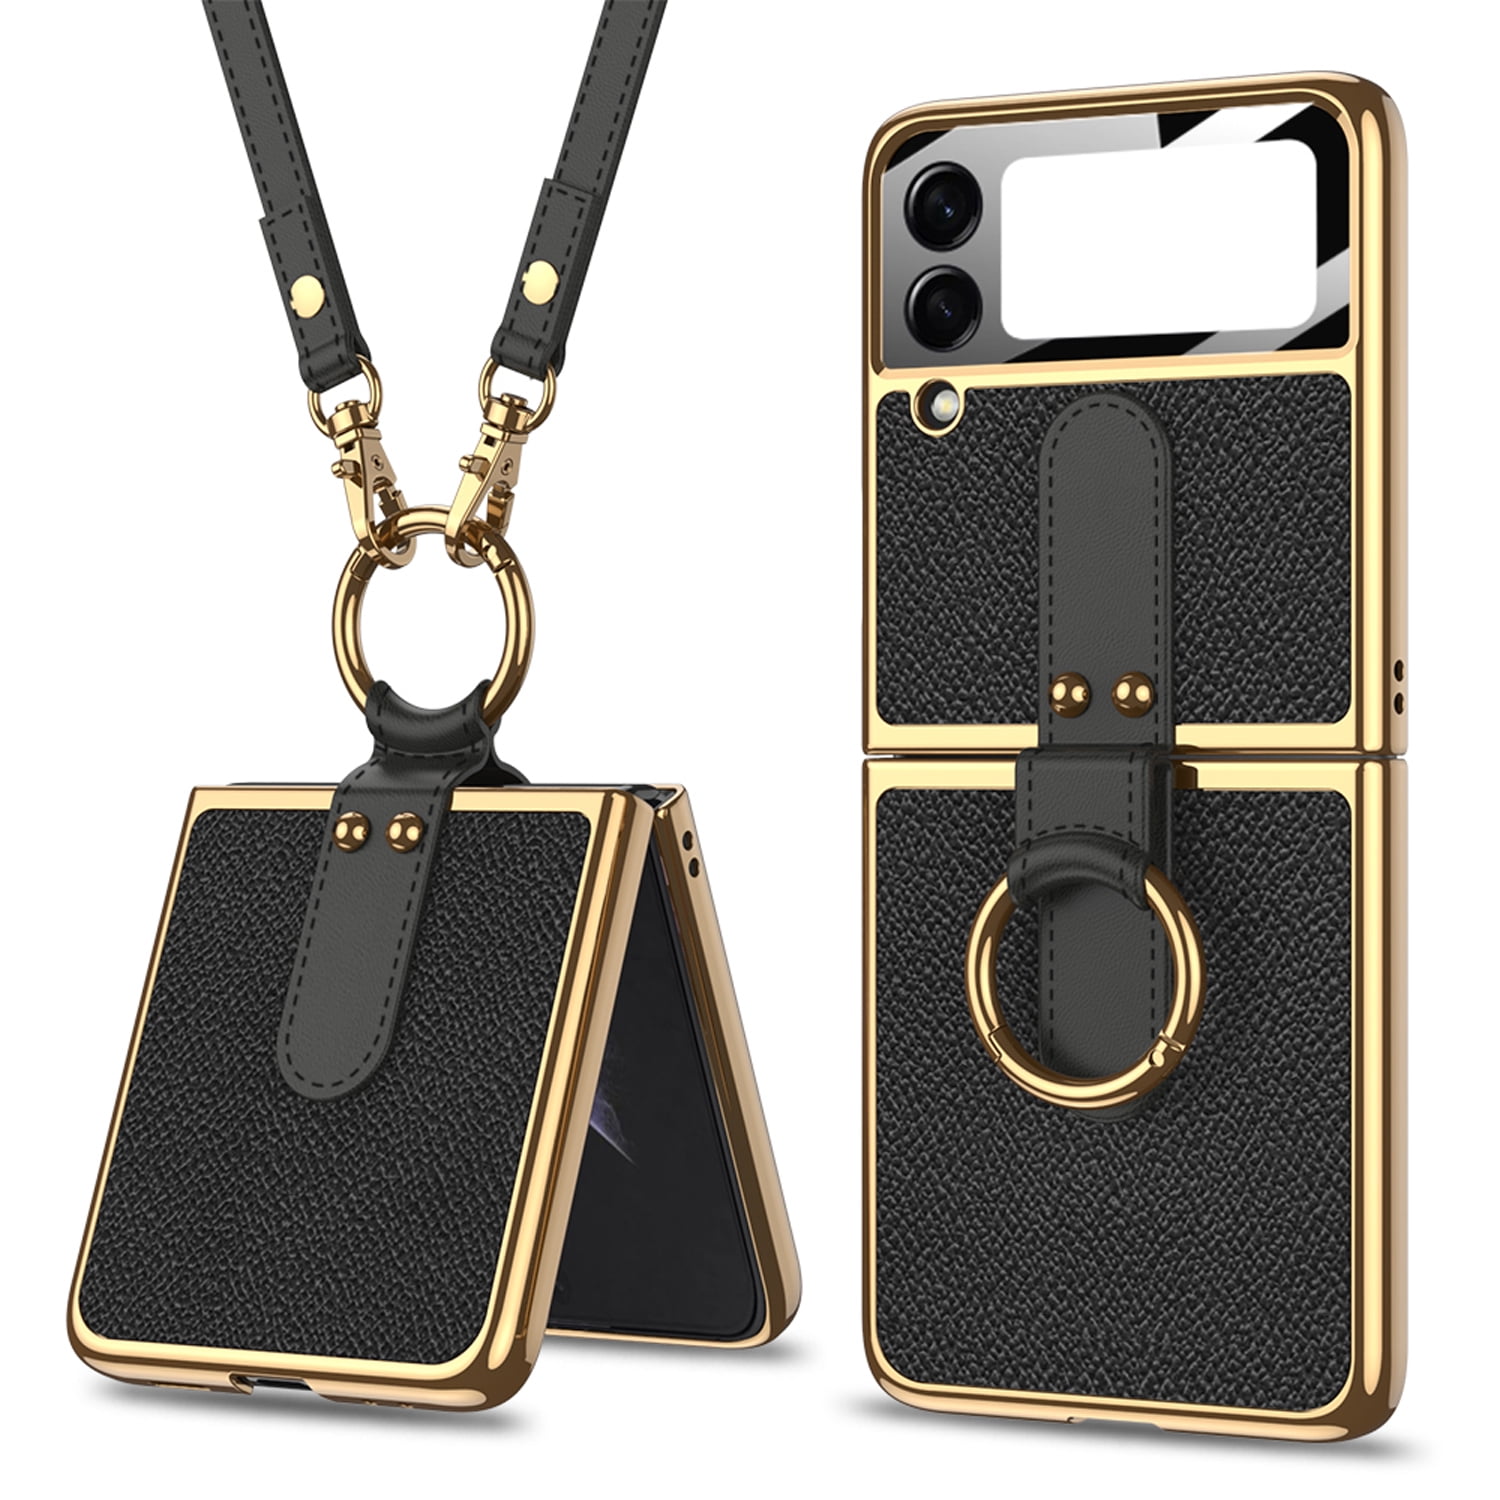 SHIEID Galaxy Z Flip 5 Case with Shoulder Strap, Ring Holder, Z Flip 5  Cover with Small Screen Protection, Premium Leather, and Wireless Charging